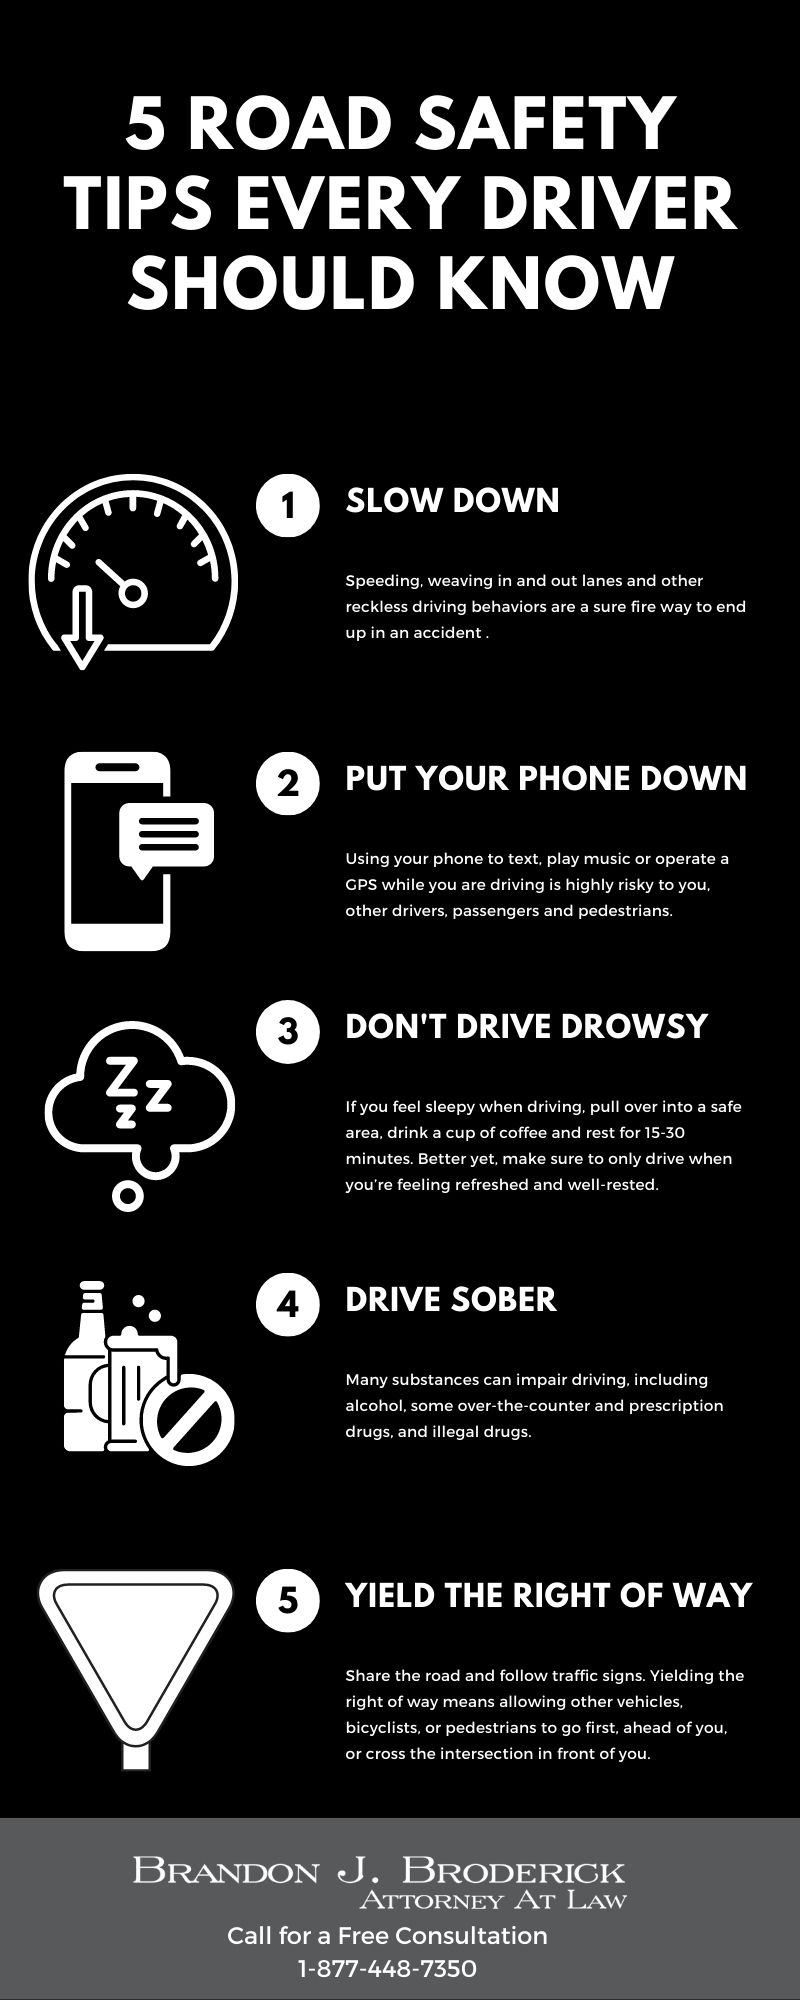 Avoid an accident during this busy fall season.  Slow down ~ Put your phone down ~ Only drive when you’re awake and alert ~ Drive sober ~ Yield the right of way. 